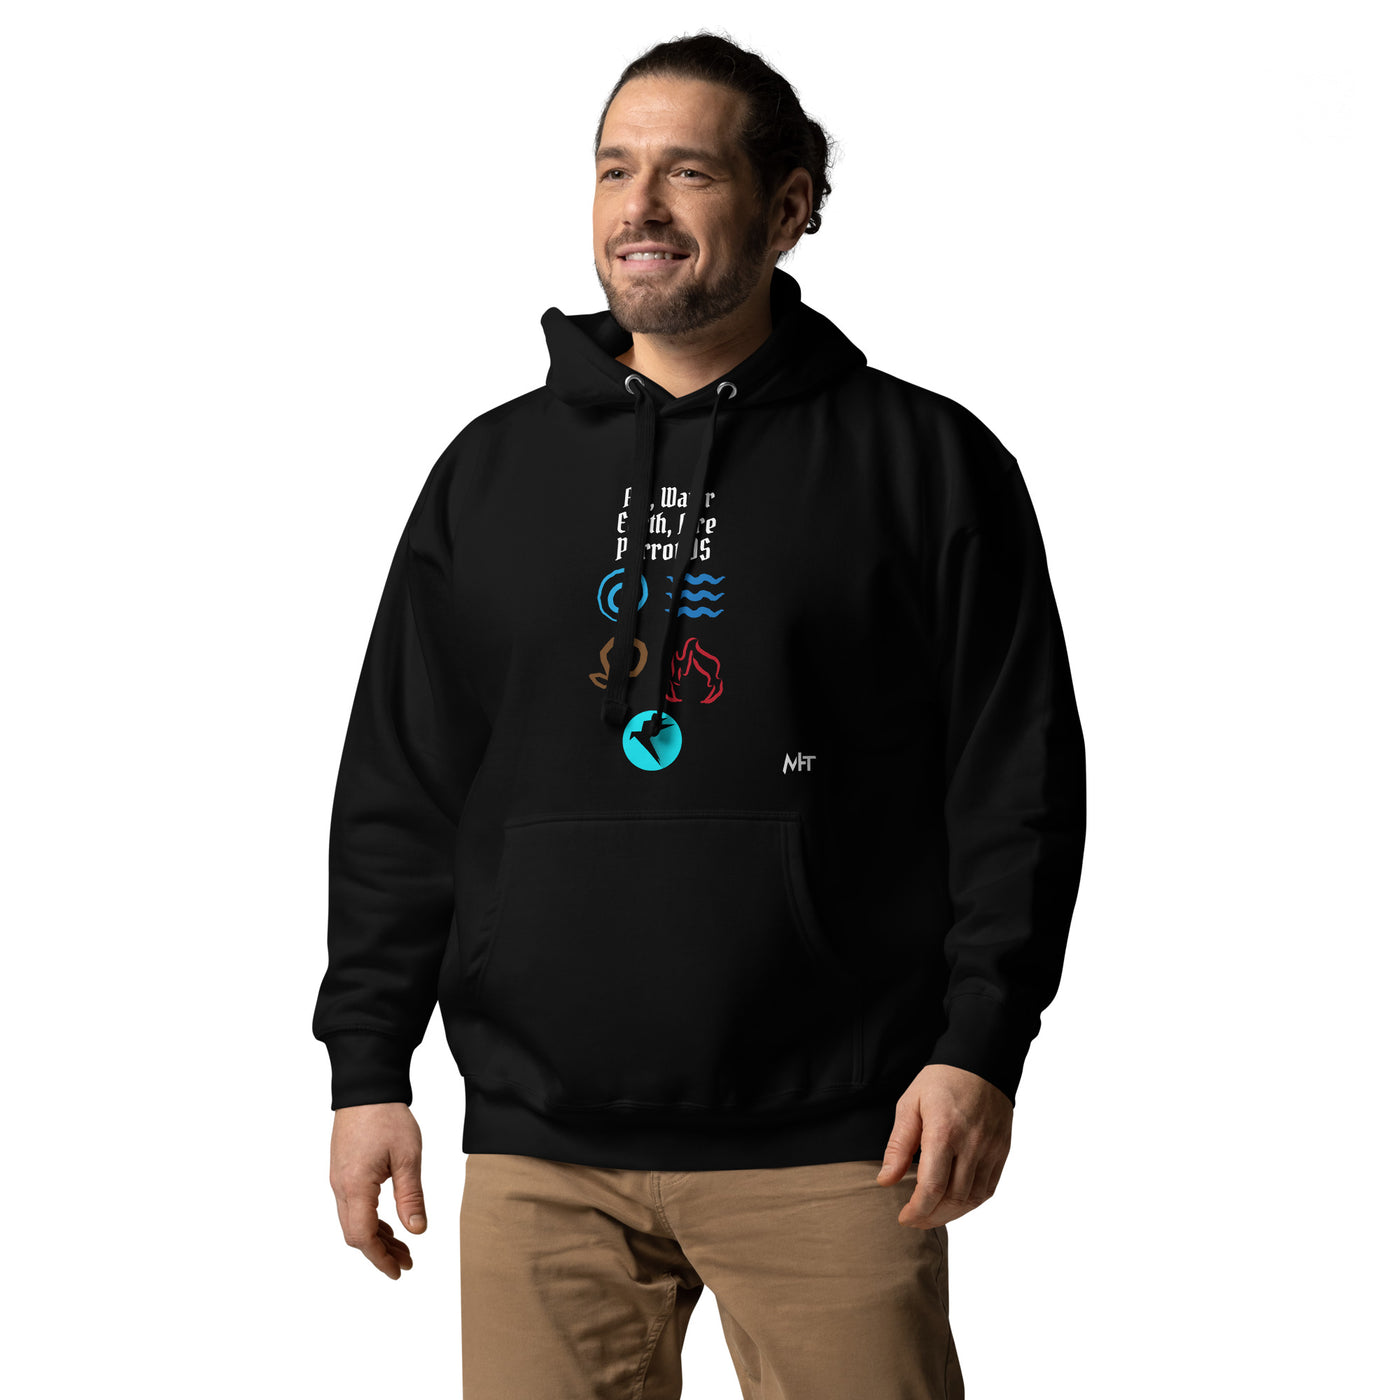 Air, Water, Earth, Fire, Parrot OS - Unisex Hoodie